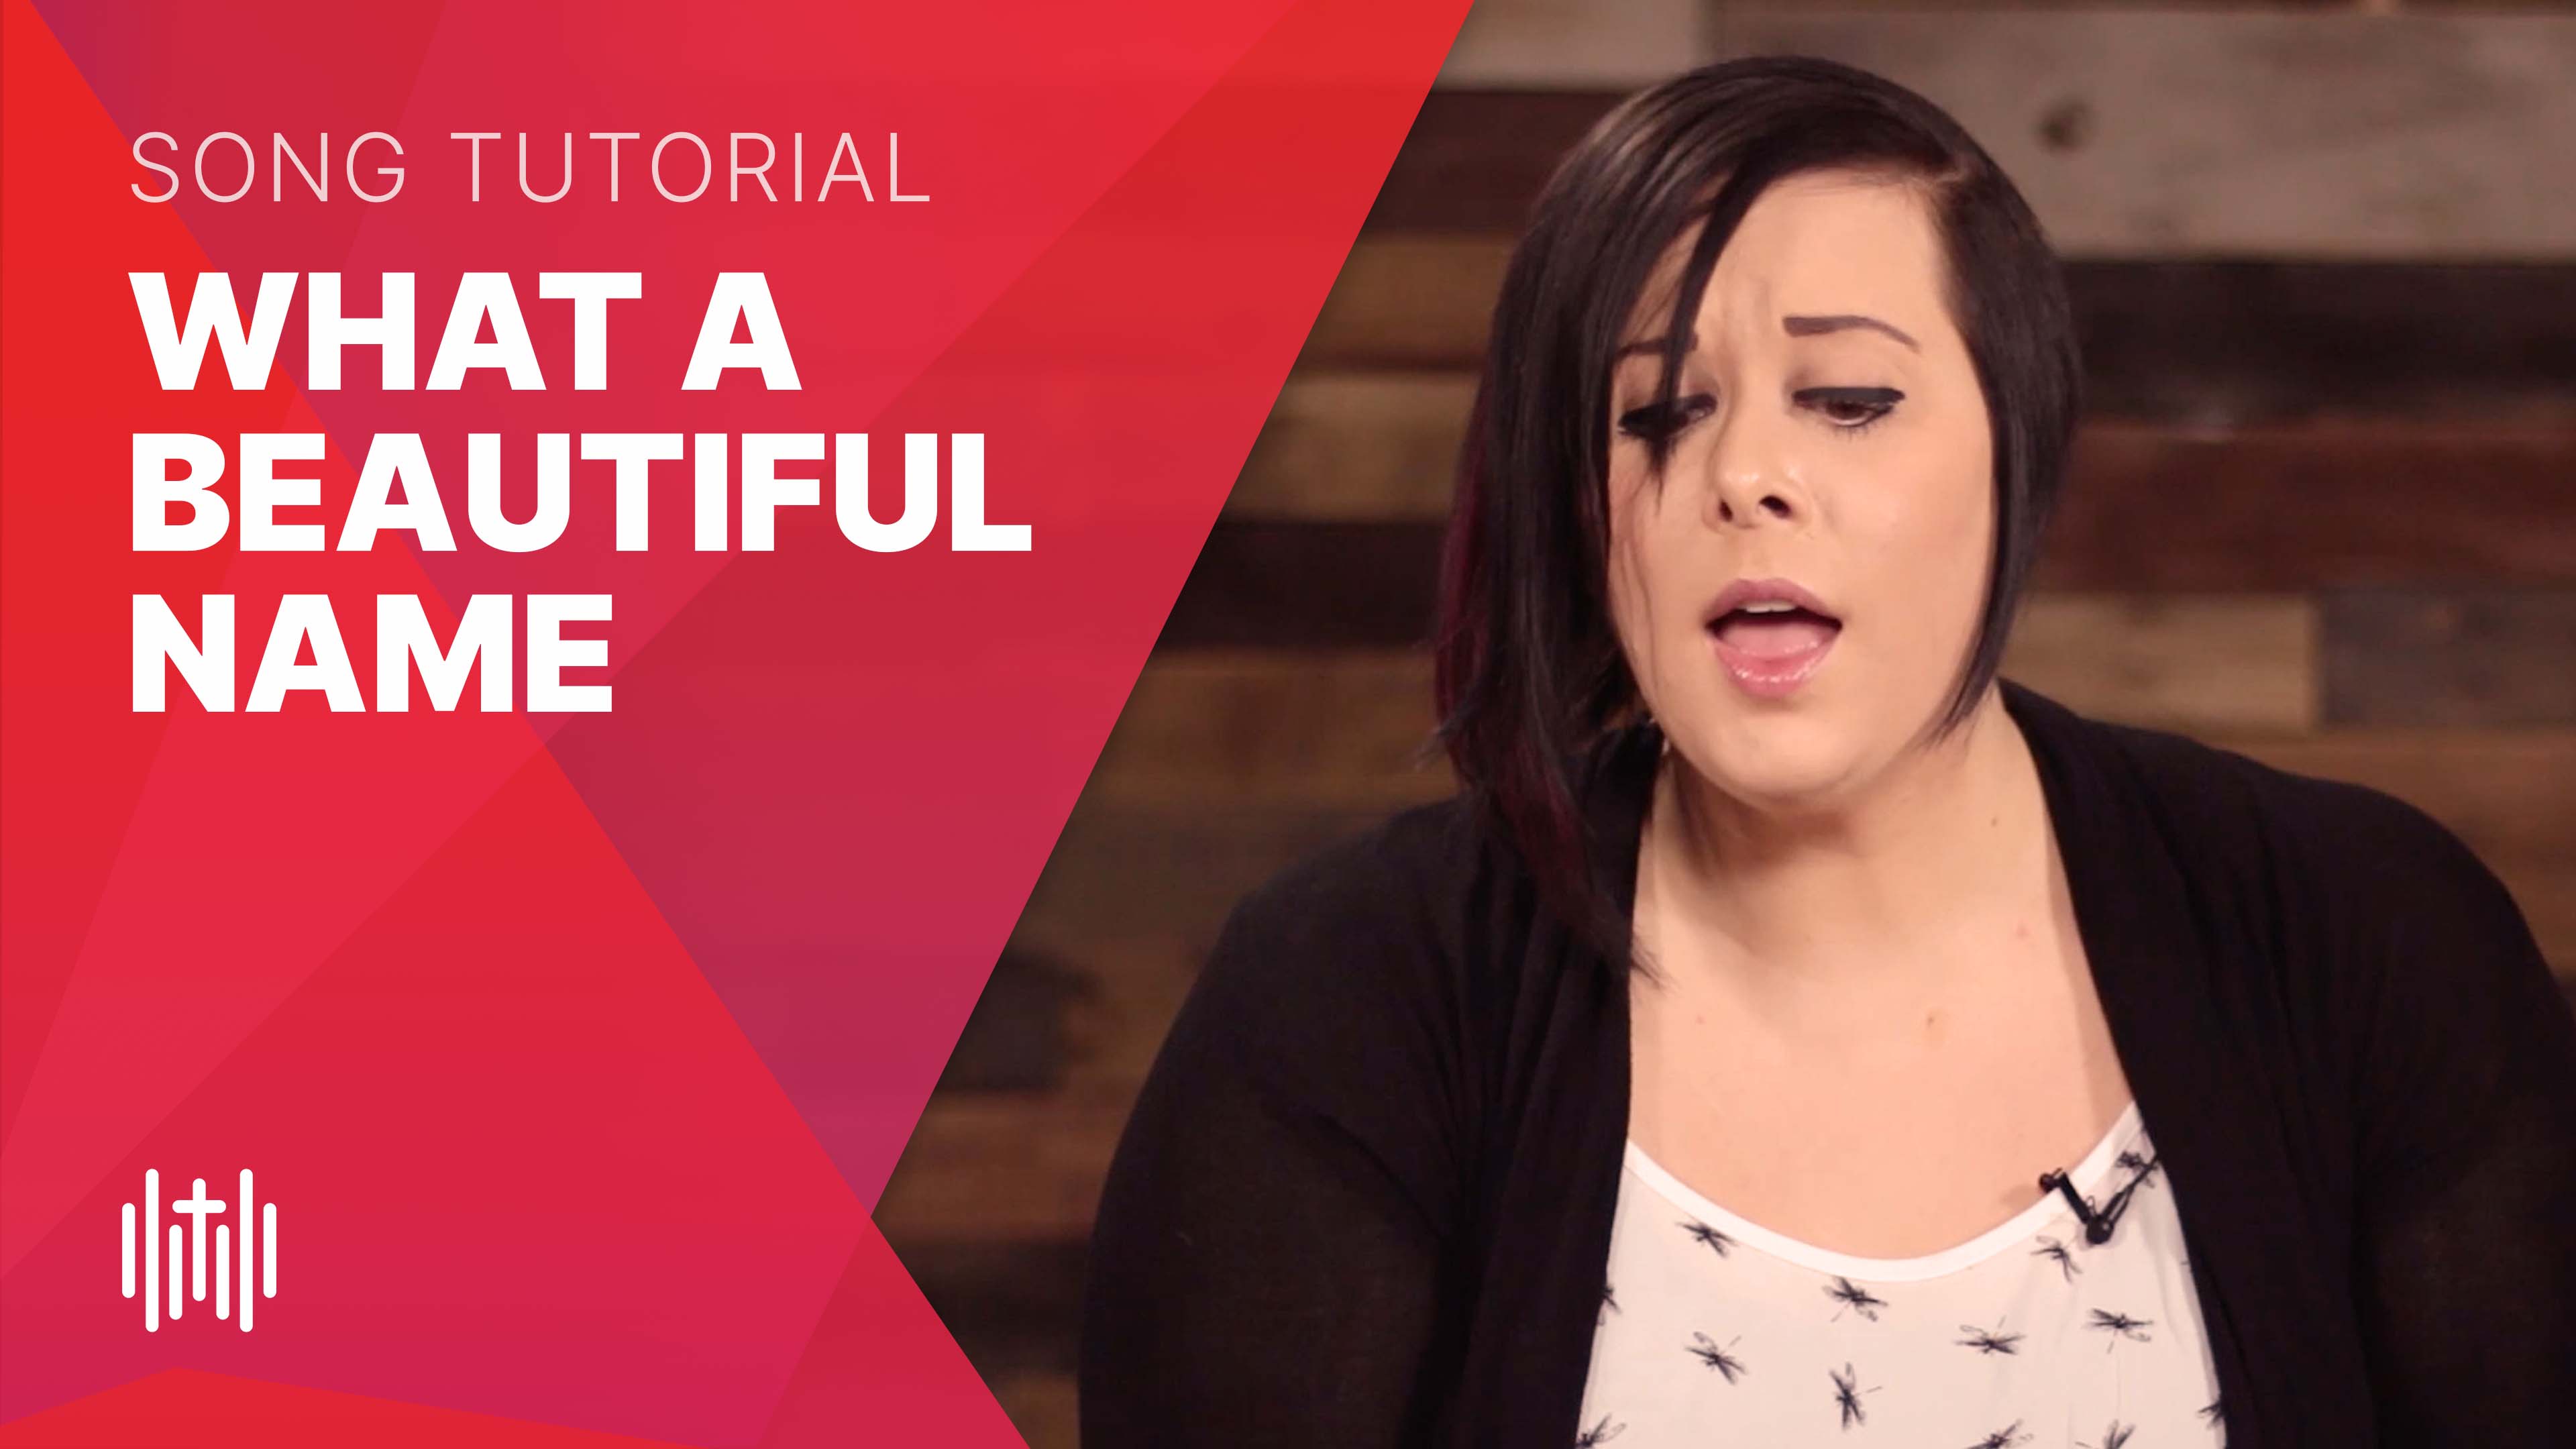 learn how to sing What A Beautiful Name like Hillsong and Brooke Fraser